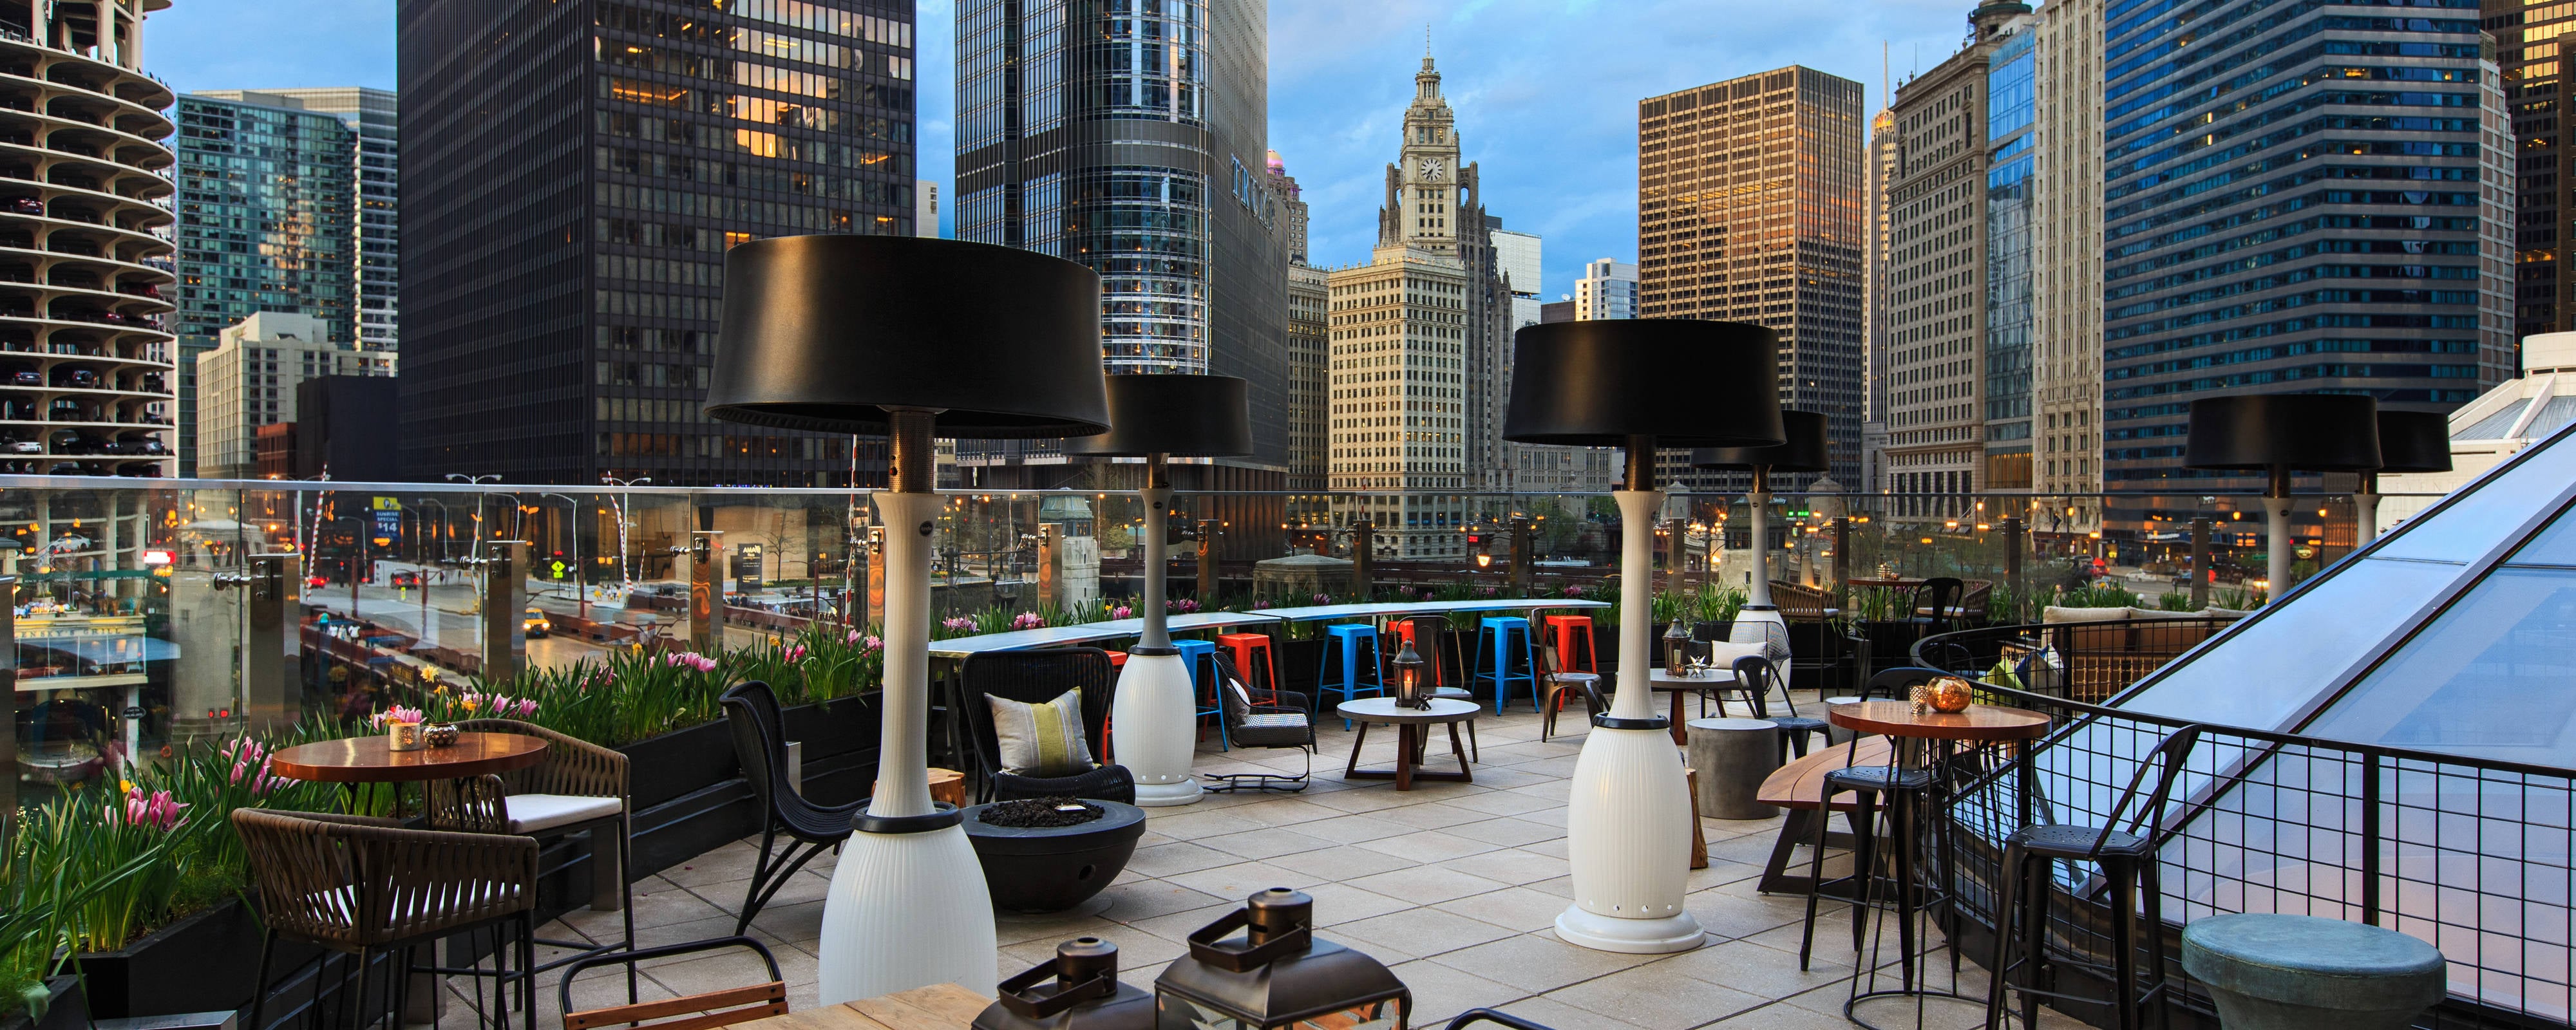 Rooftop Bars and Downtown Restaurants | Renaissance Chicago Downtown Hotel